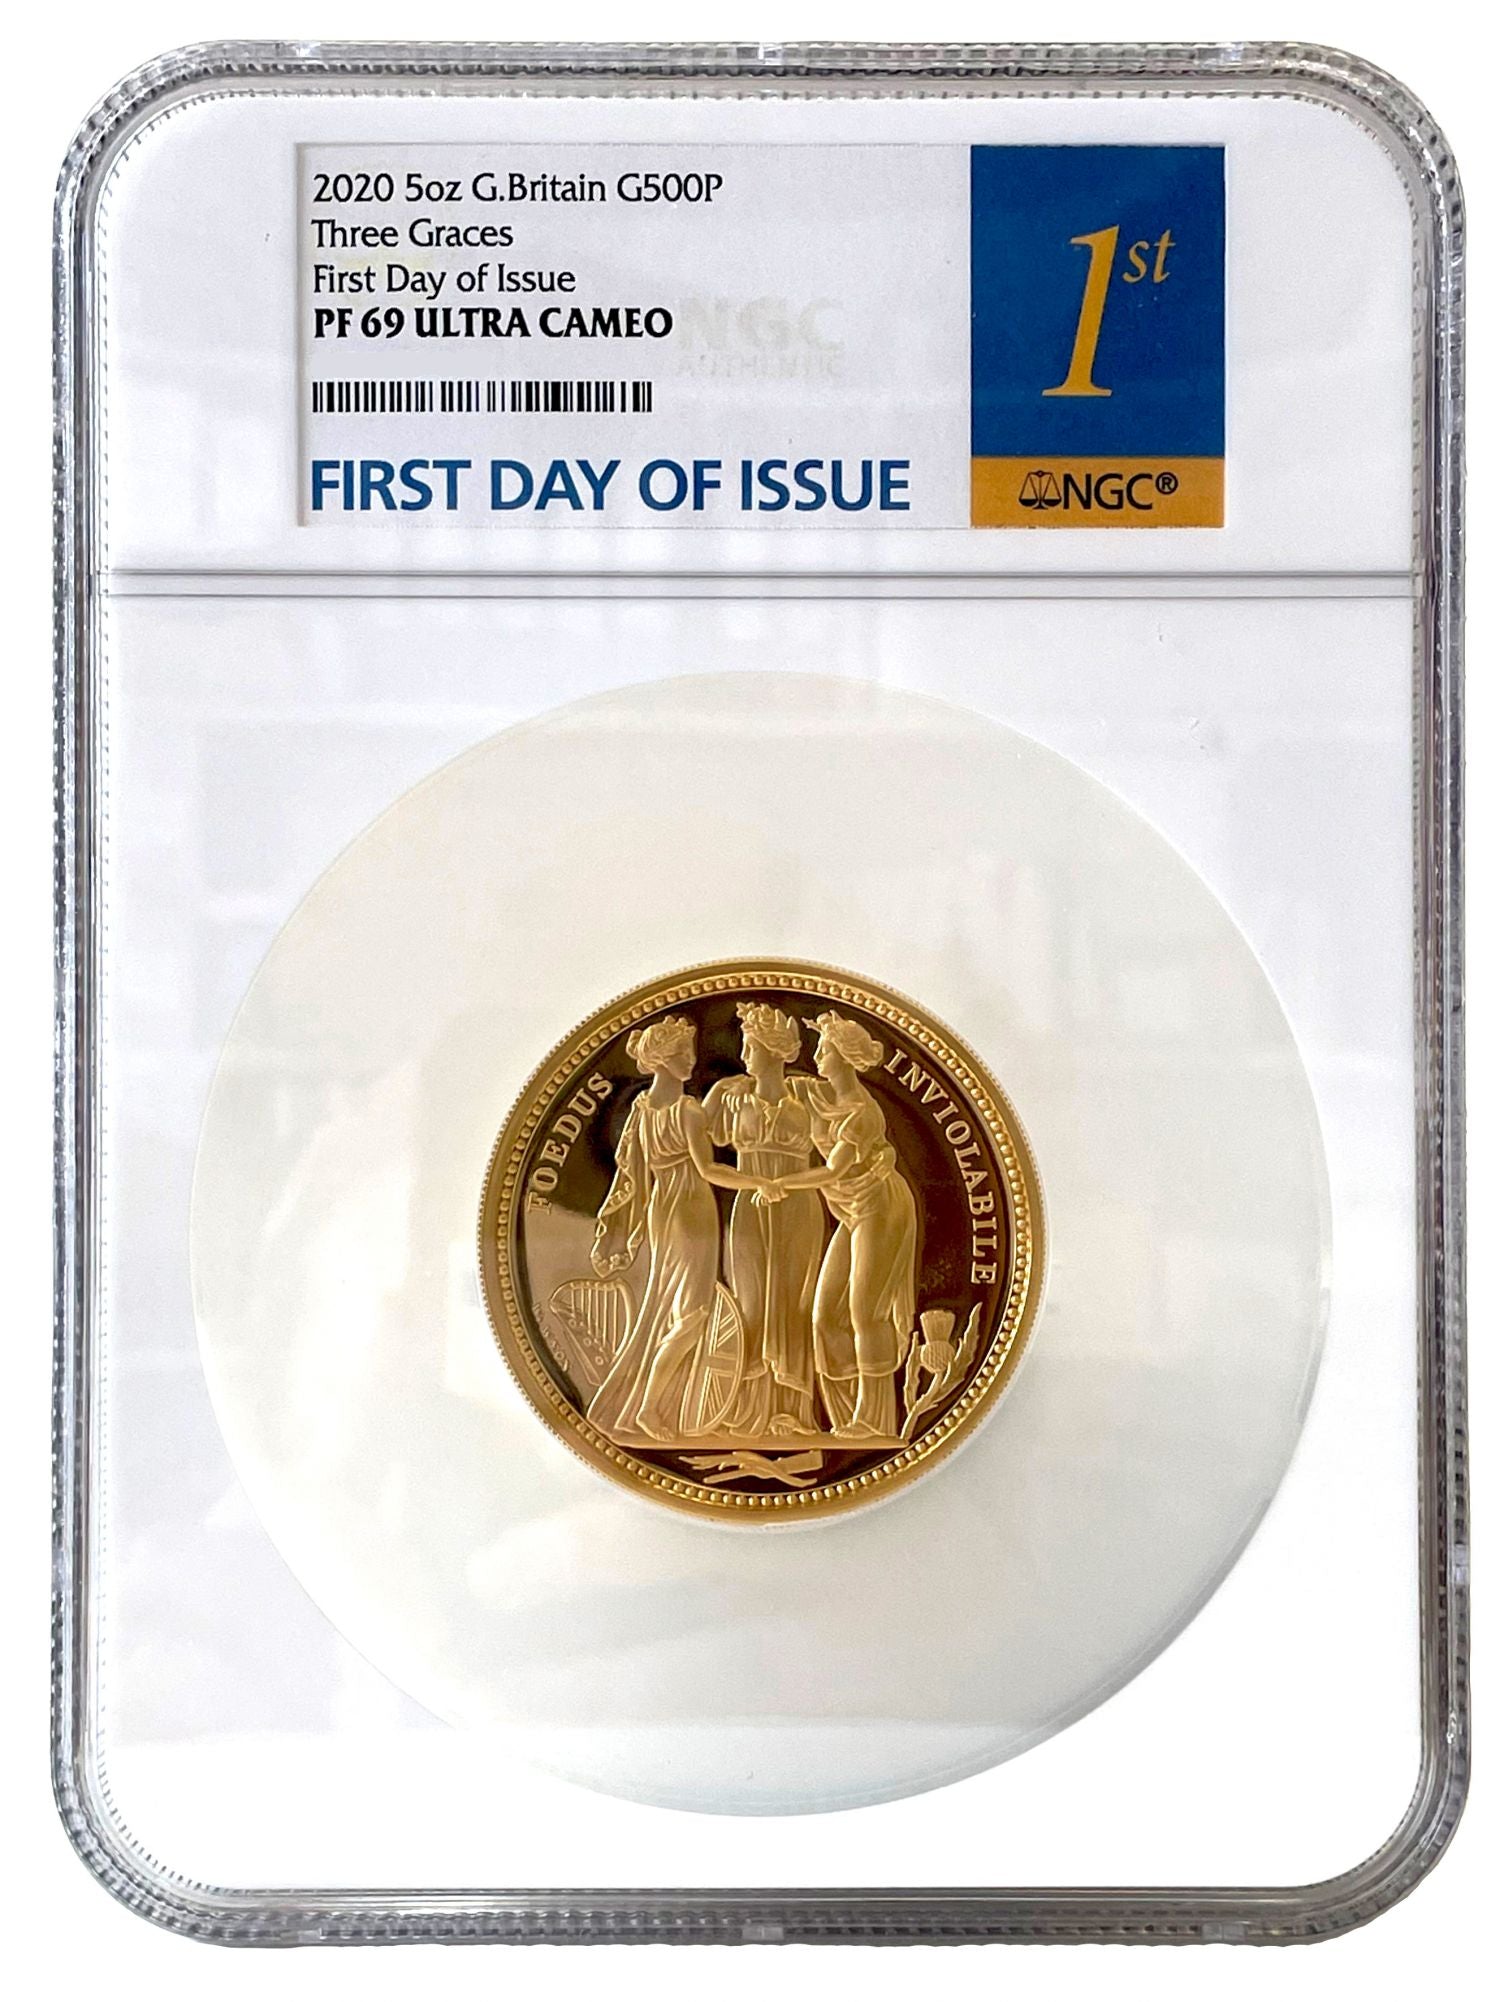 * QEII 2020 gold PF69 1st Day of Issue 5oz Three Graces